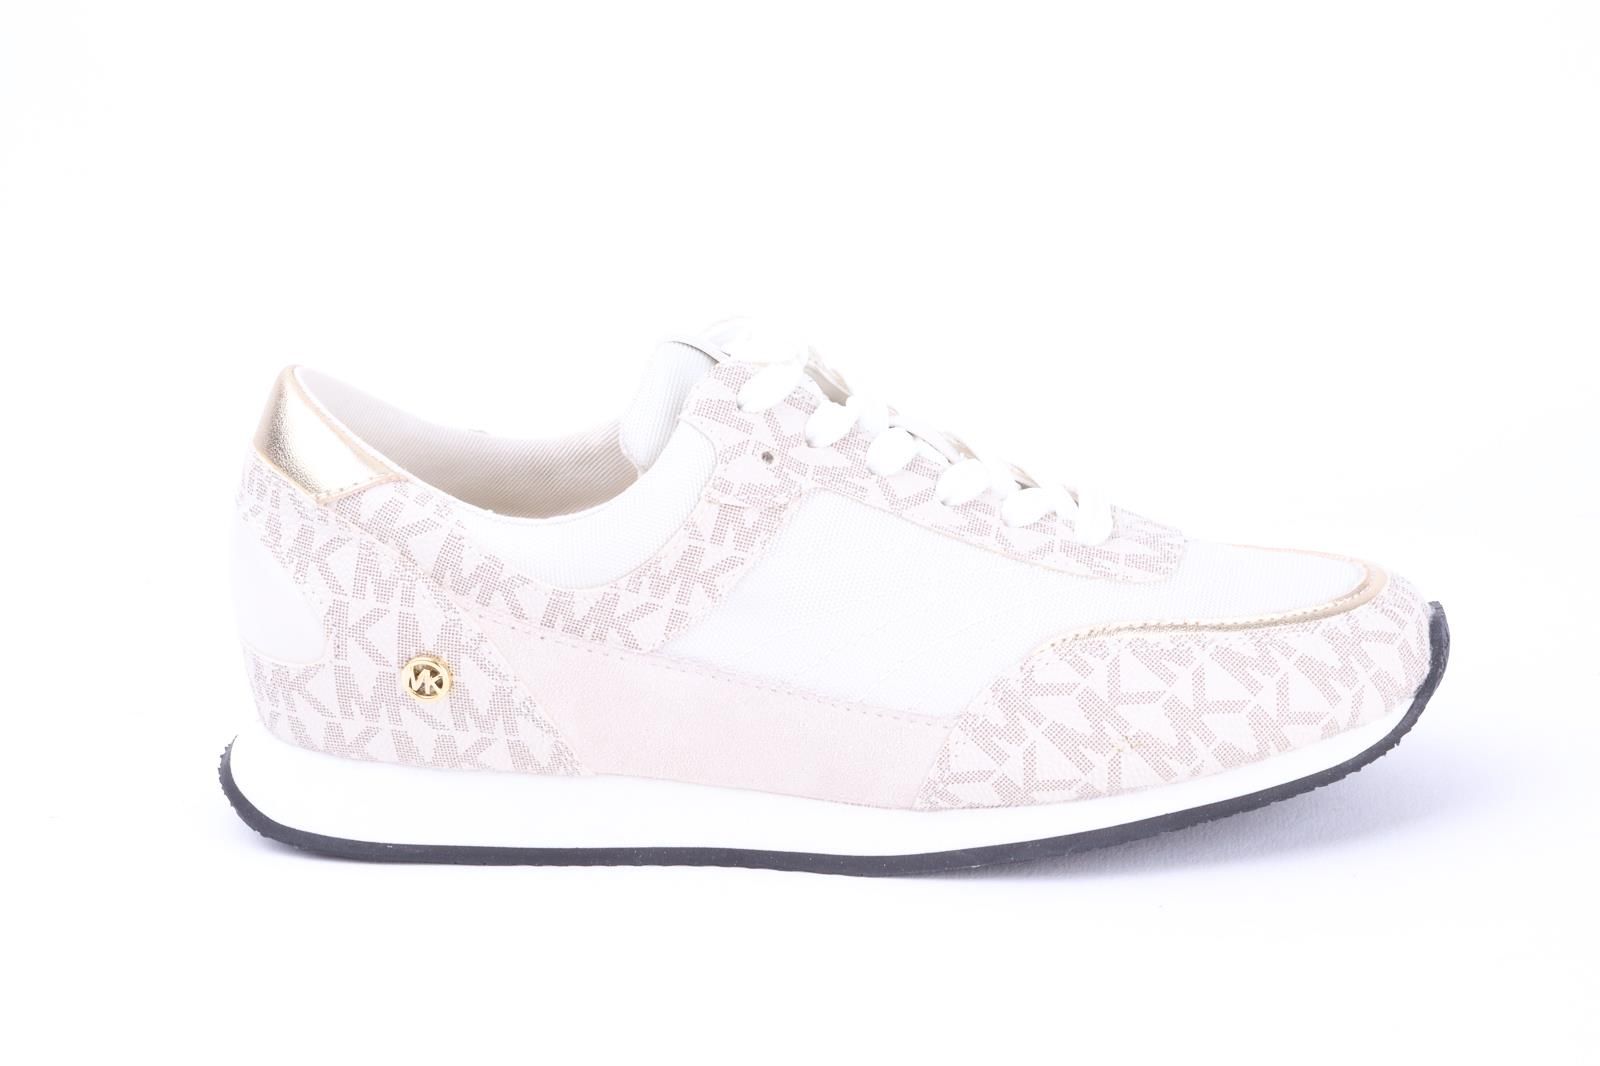 Sneakers  Michael Kors  White  43T2KTFS2L085  Free delivery  Carmi  shoes and fashion